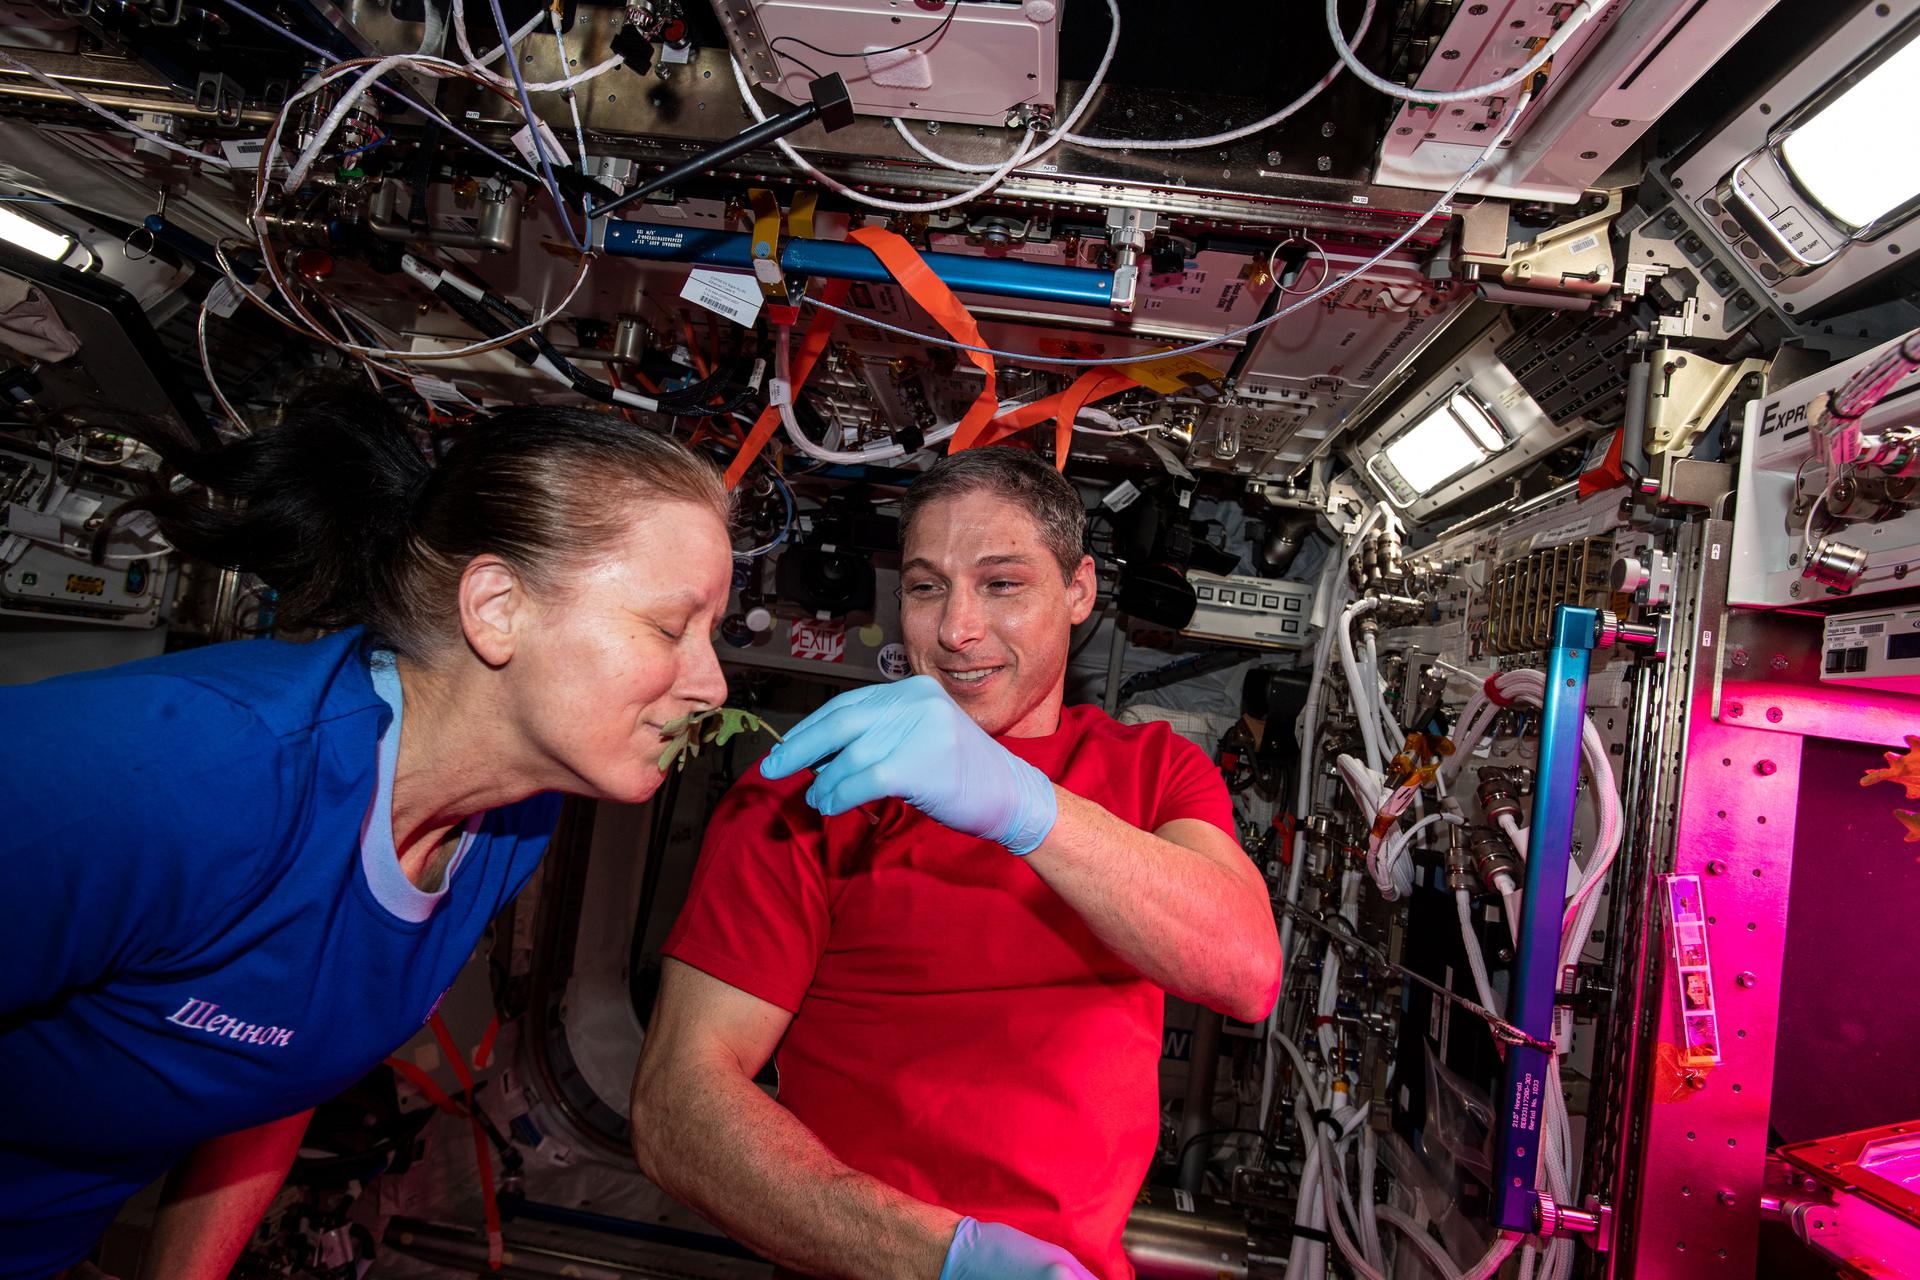 NASA astronauts Shannon Walker and Michael Hopkins on the ISS